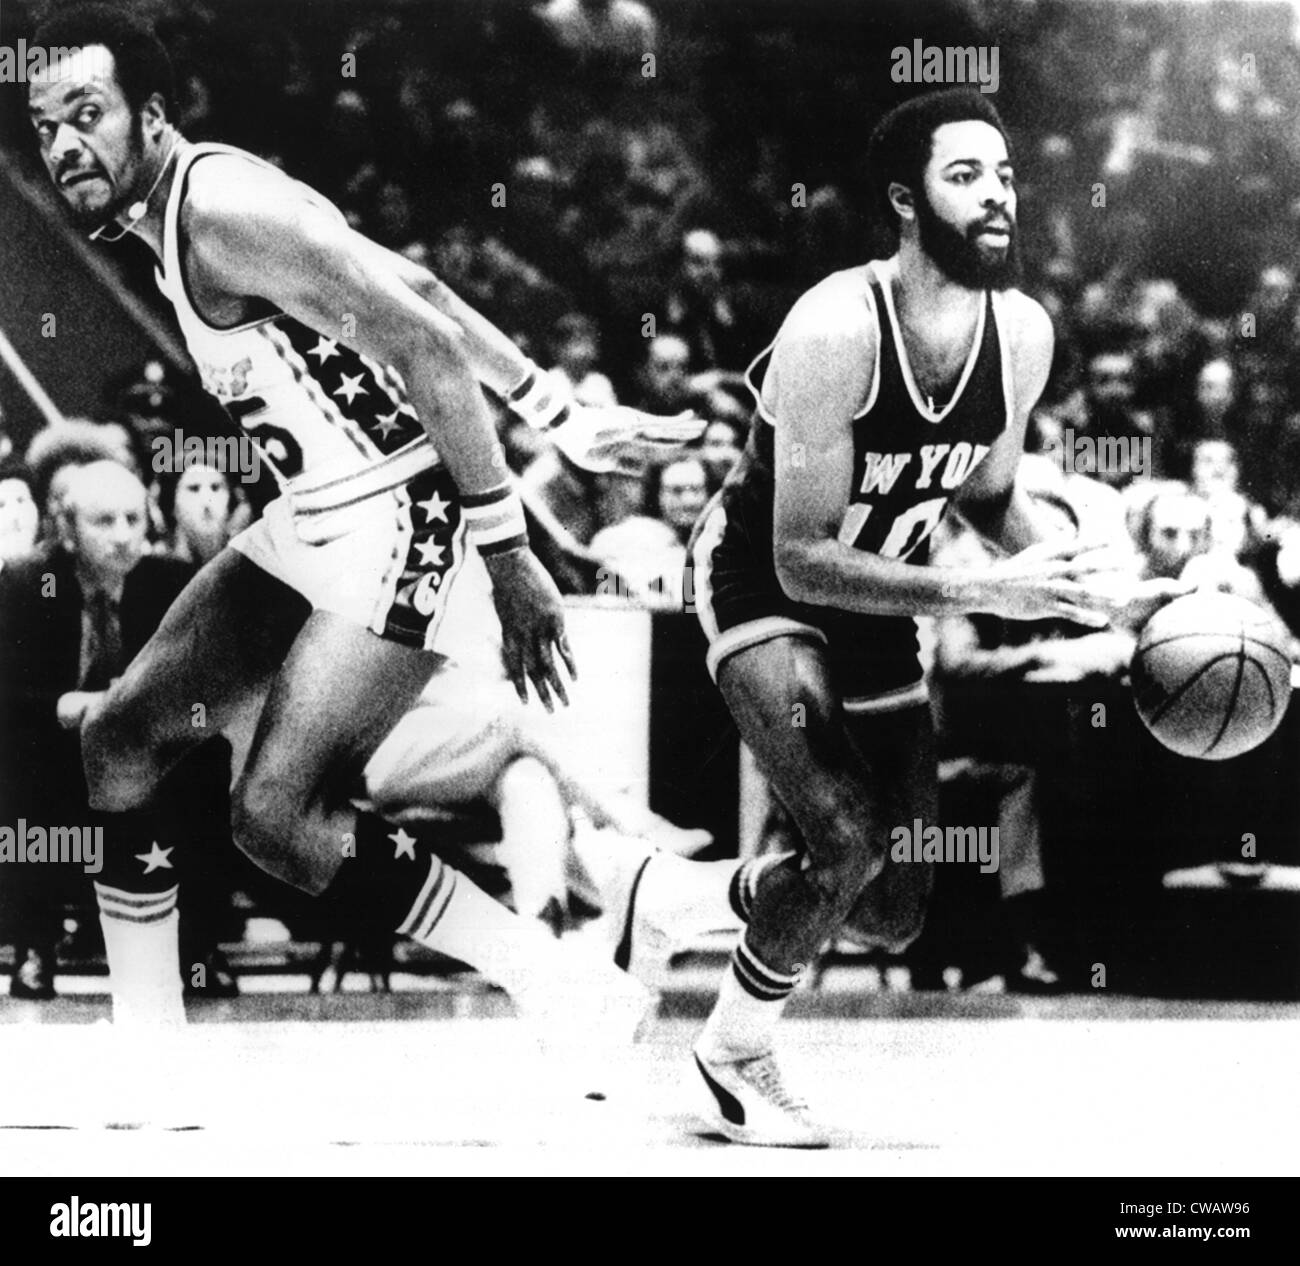 Philadelphia Sixers' Bob Rule (L), & NY Knicks' Walt Frazier (R), with the basketball, in their game in Phila, PA, January 7, Stock Photo